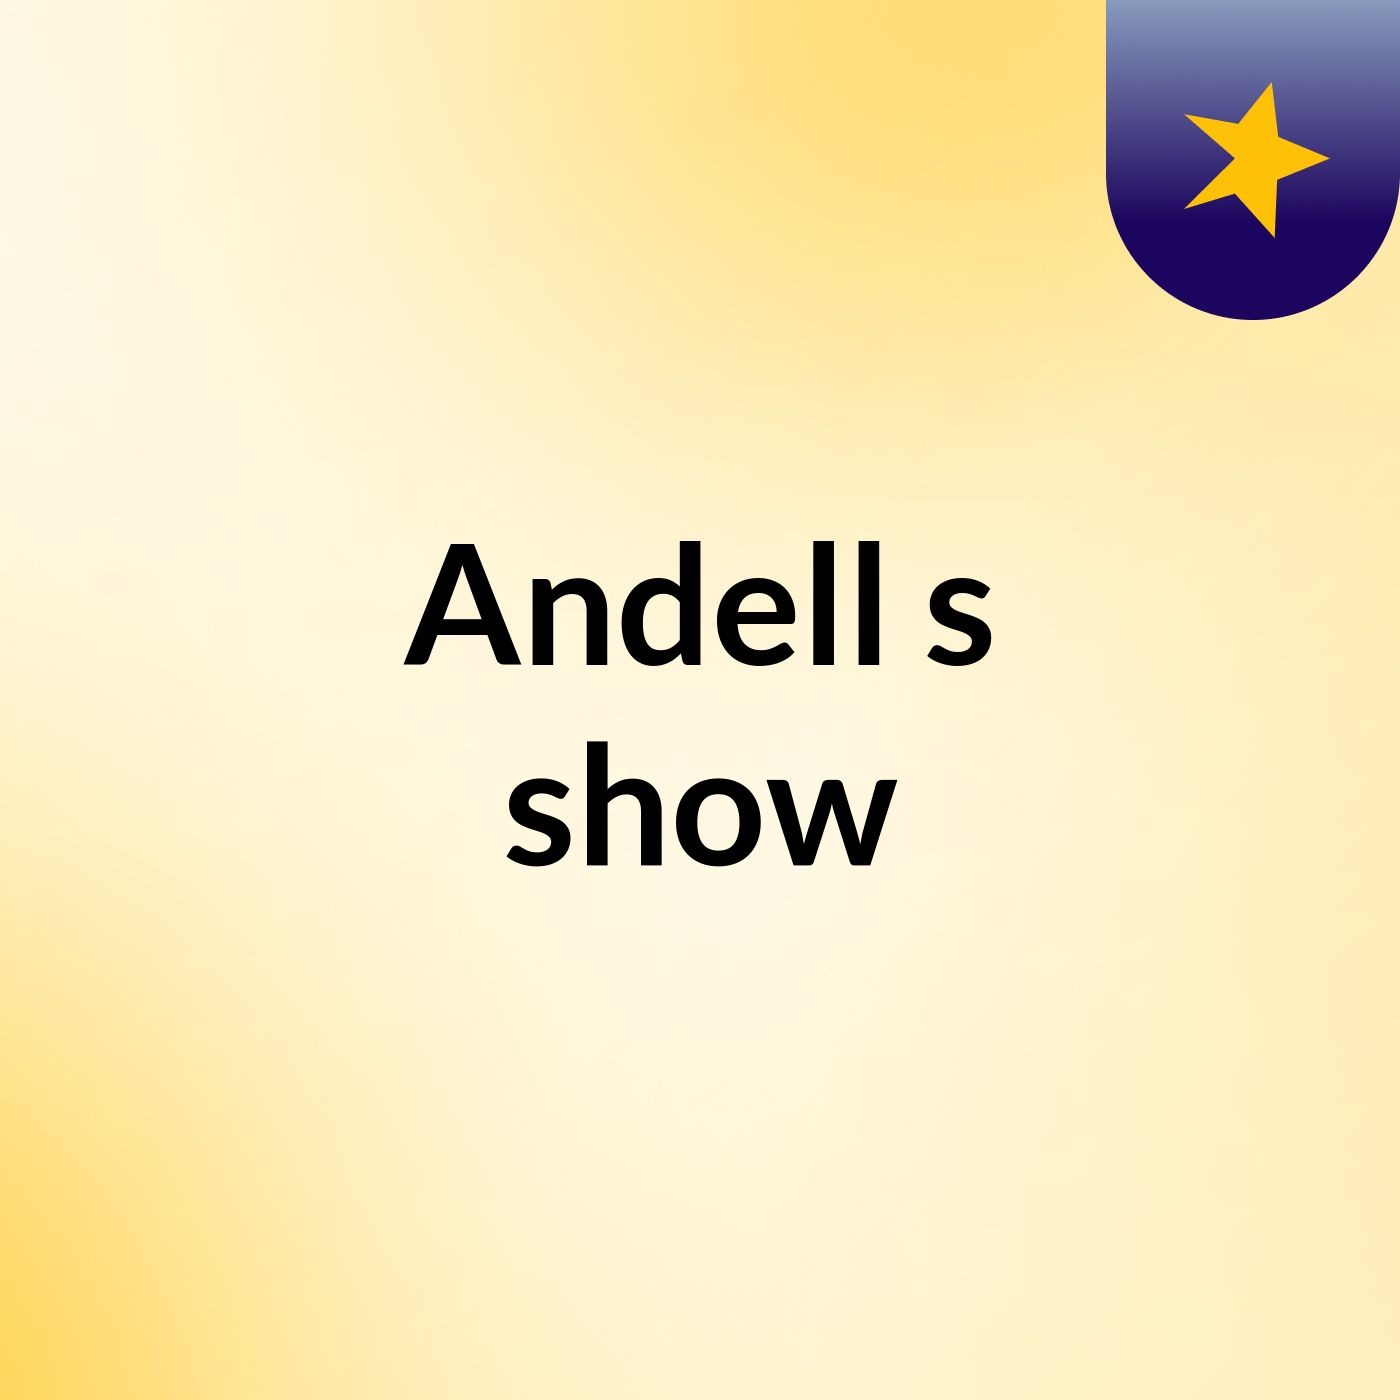 Andell's show